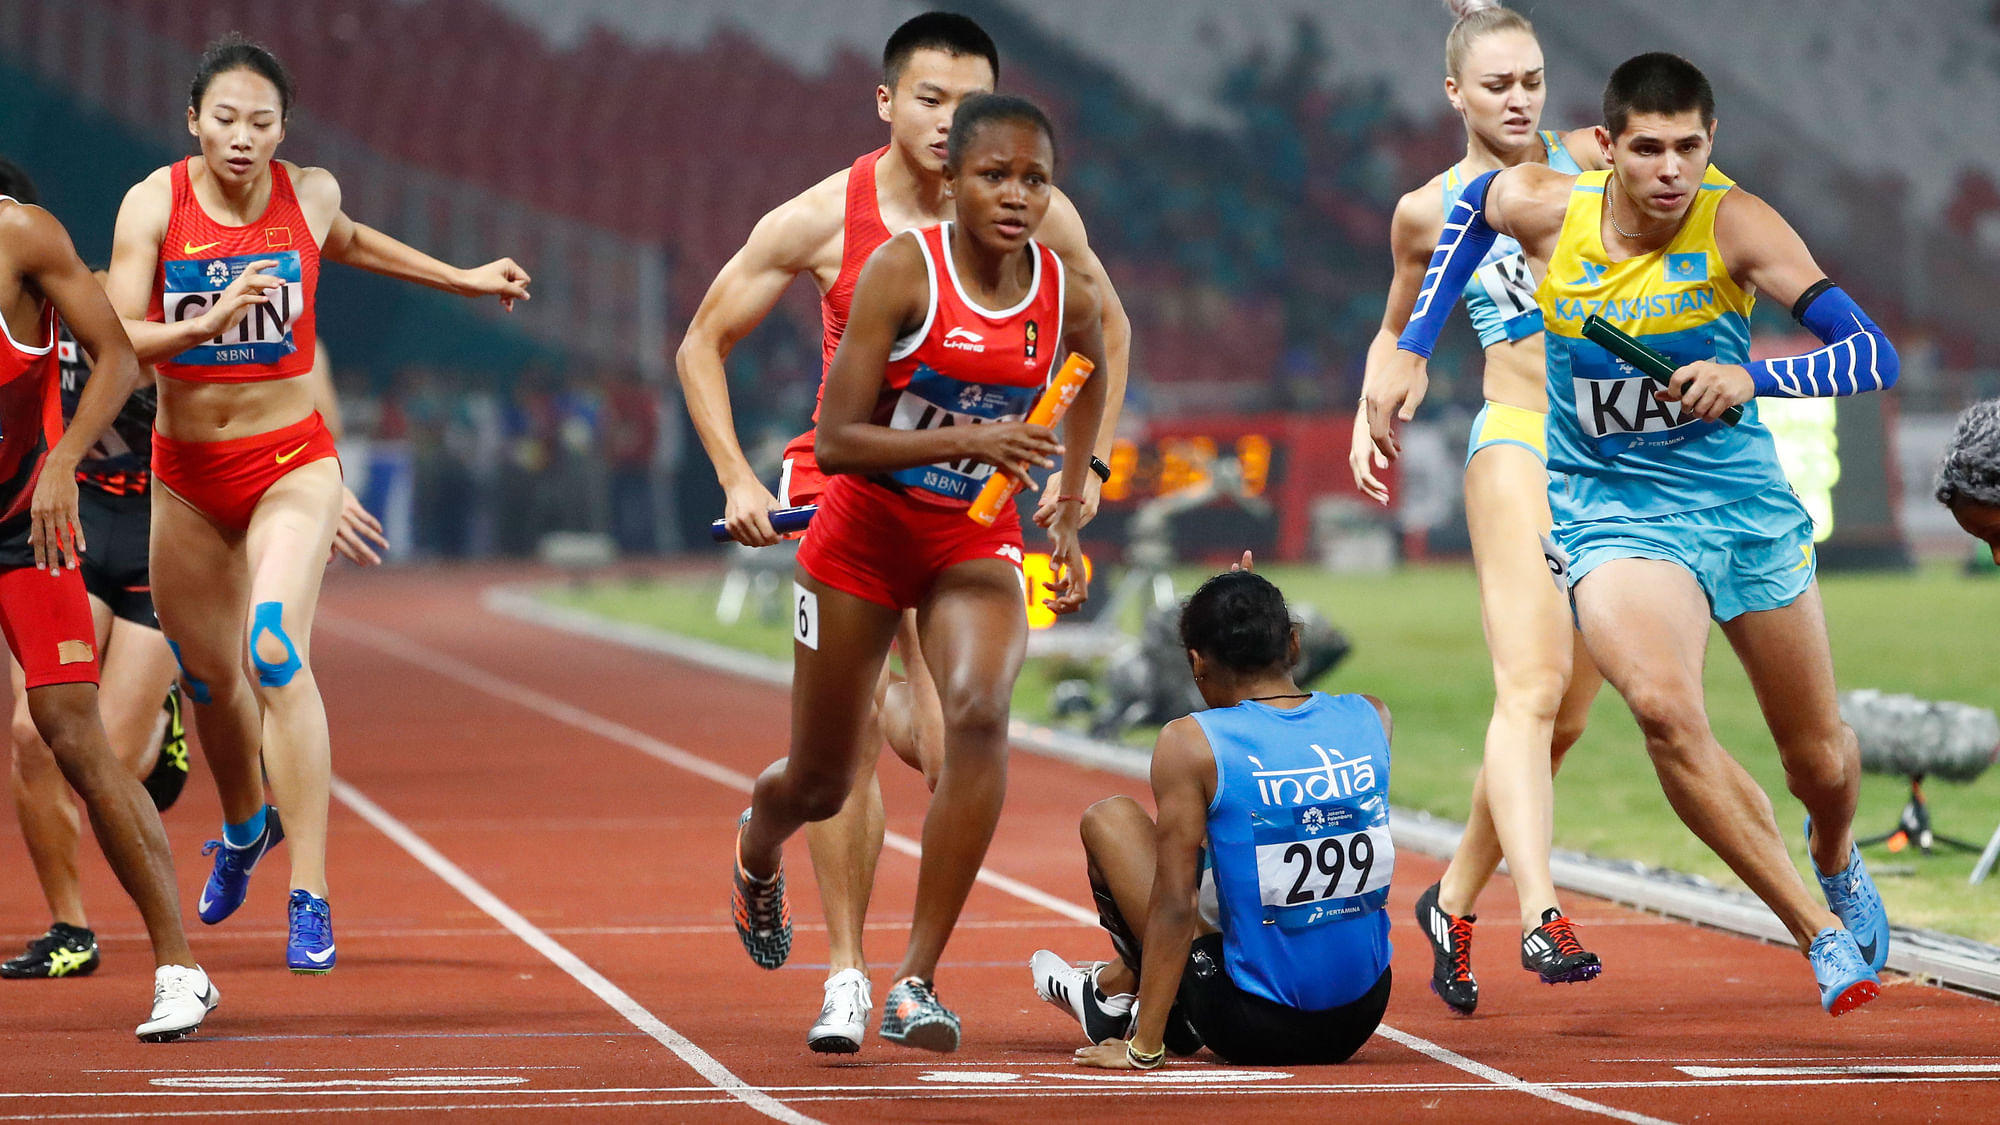  Athletics Federation of India lodged a protest against Bahrain for causing obstruction to Hima Das during 400m mixed relay.